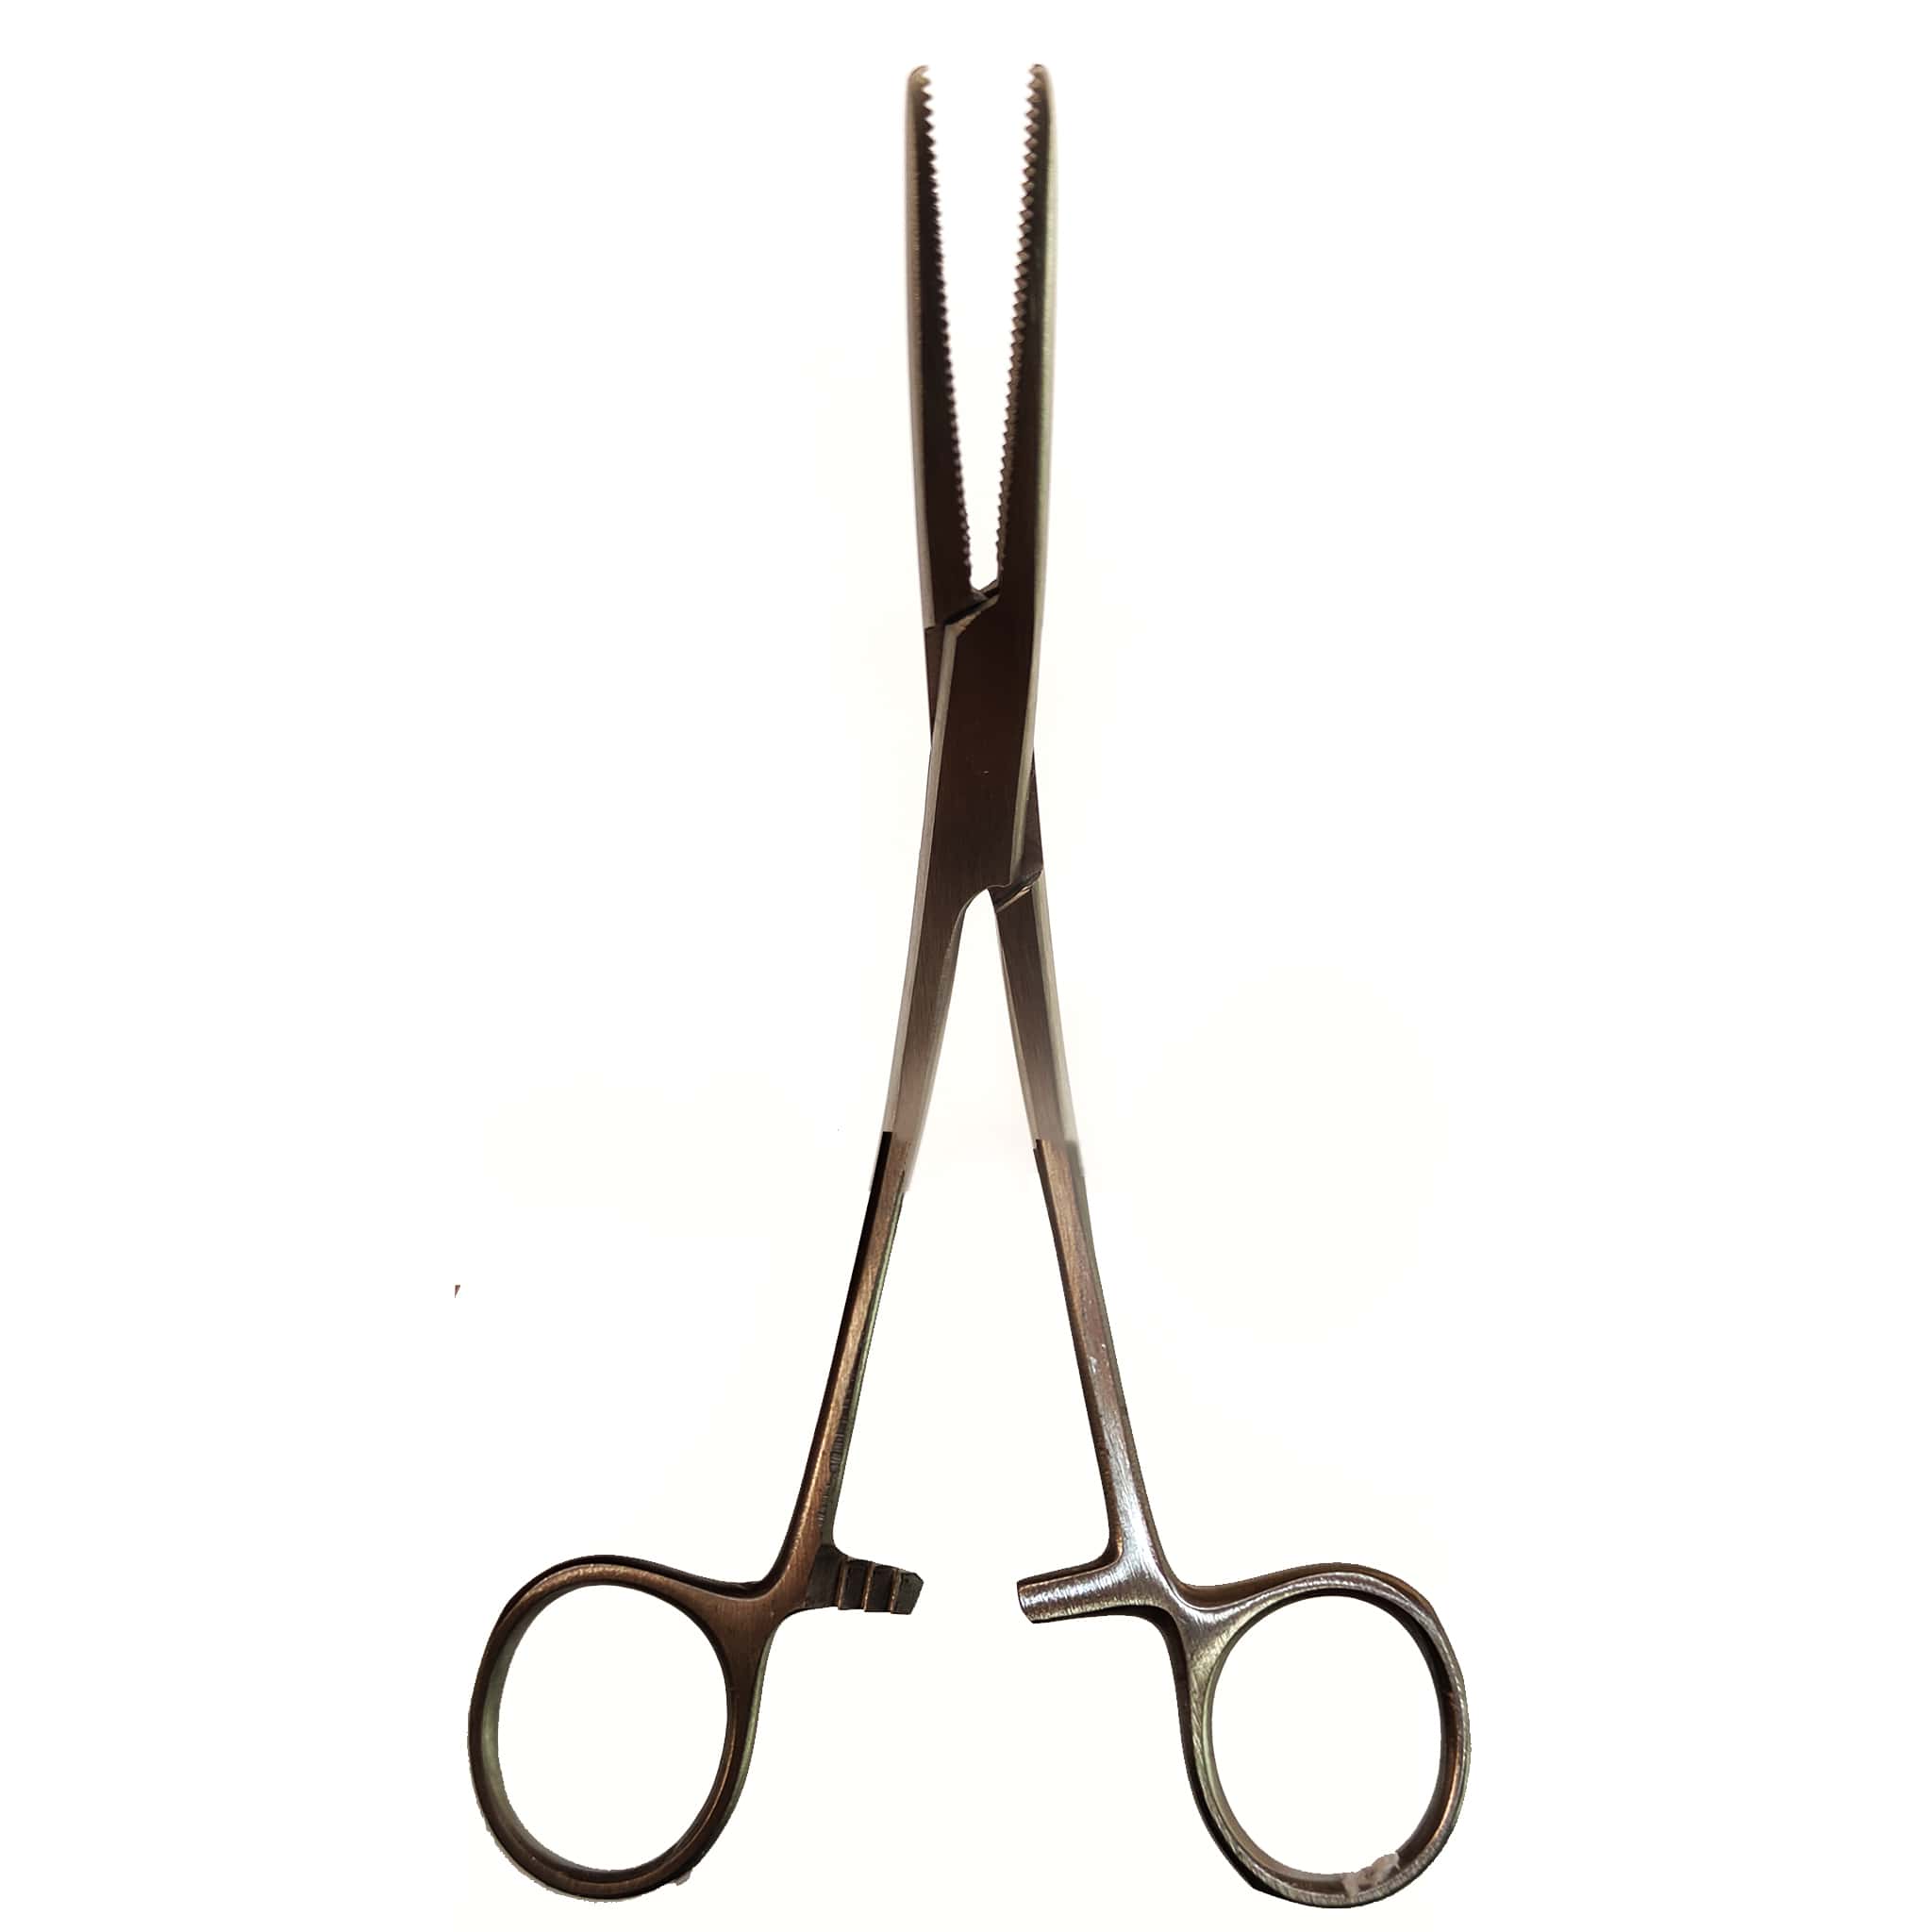 Indian Artery Forceps (6 inches)